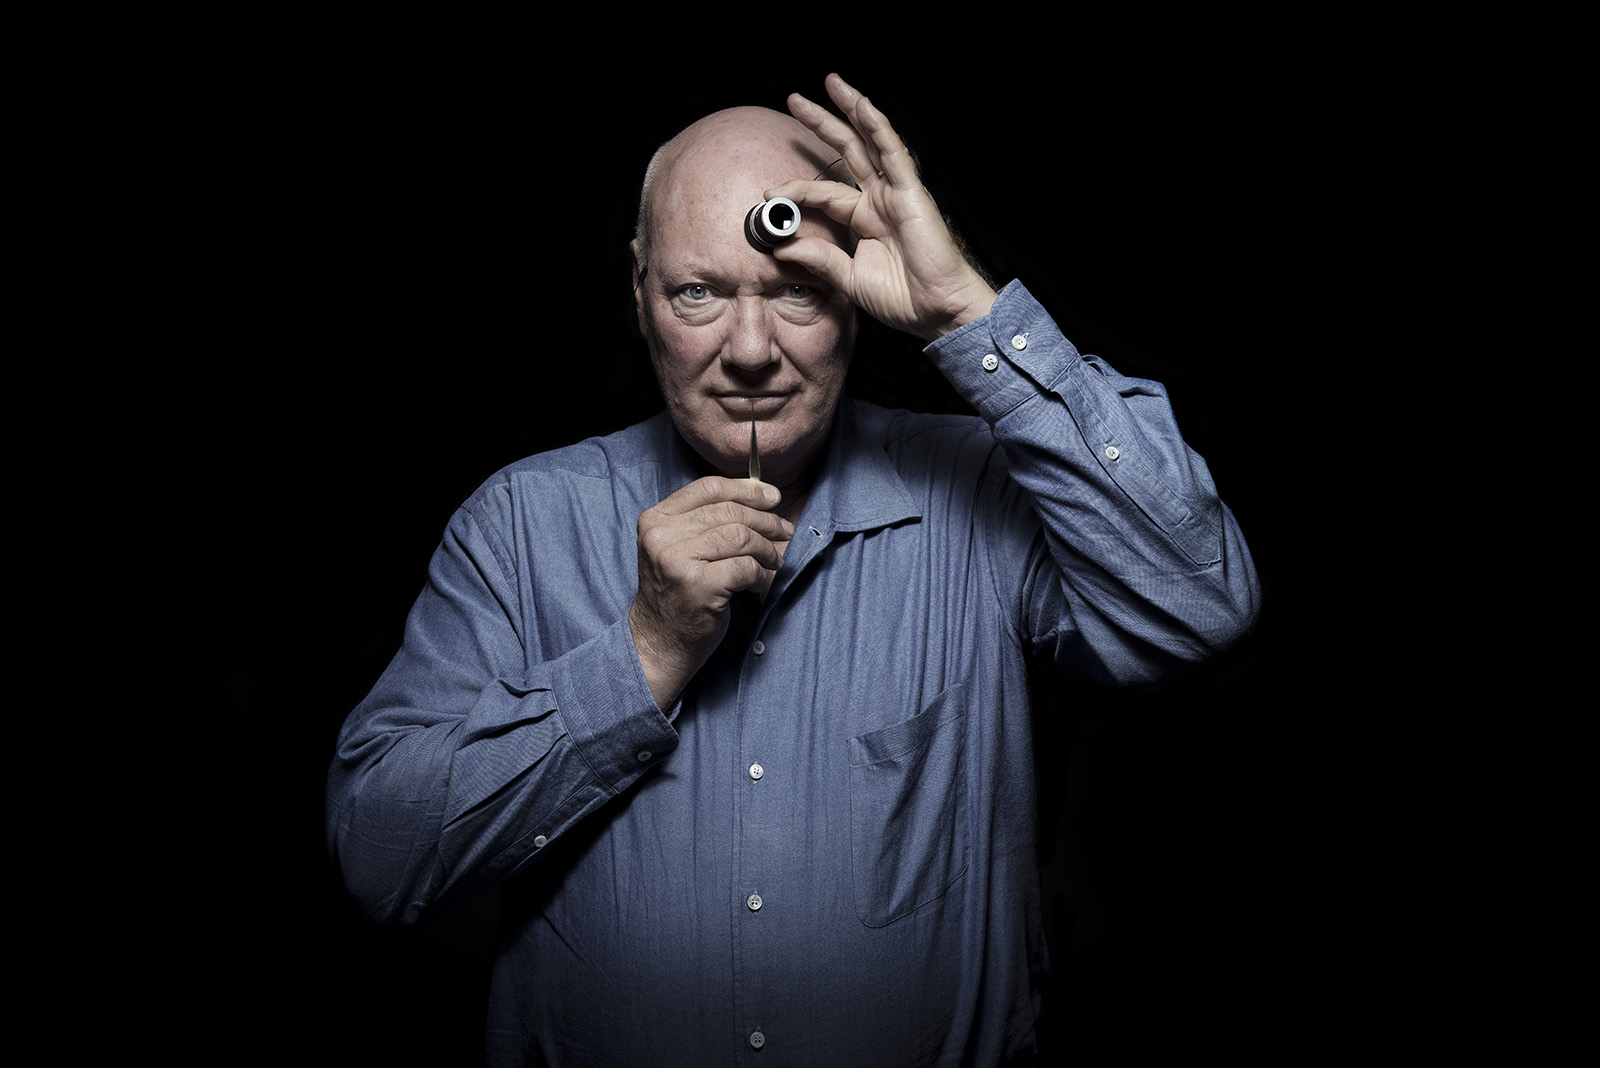 Horological Meandering - Zenith's CEO Jean-Claude Biver thanks the